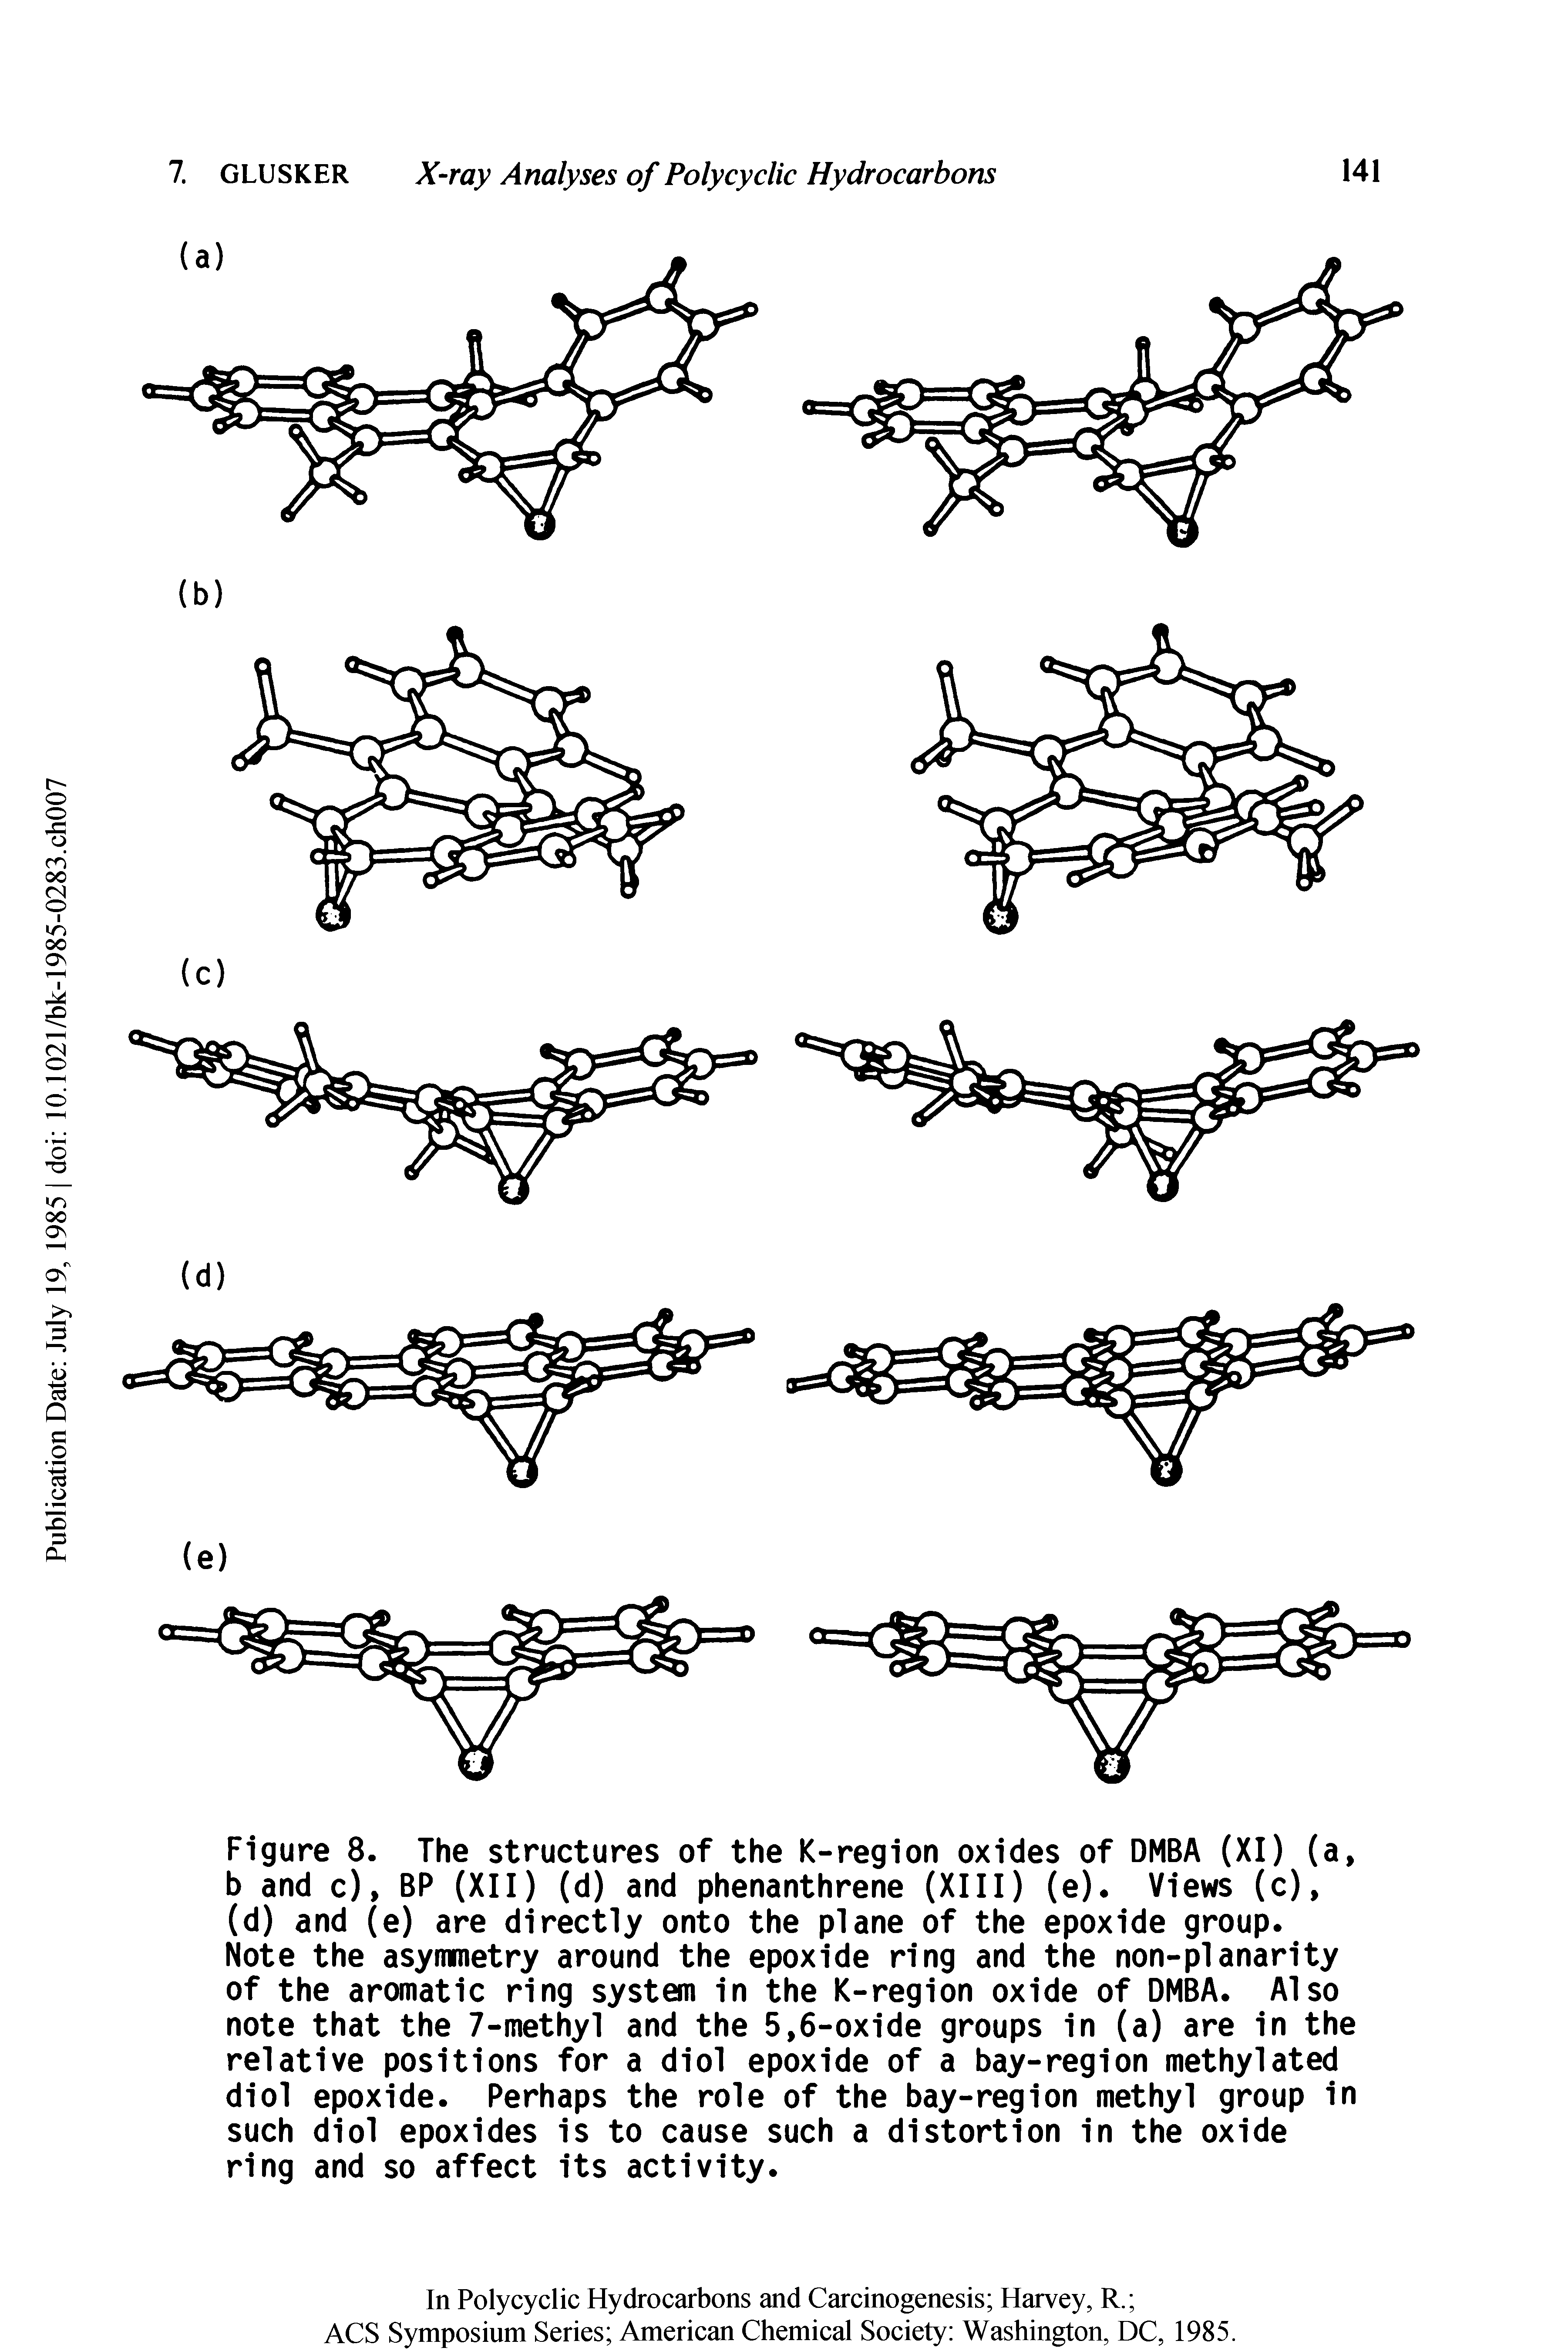 Figure 8. The structures of the K-region oxides of DMBA (XI) (a, b and c), BP (XII) (d) and phenanthrene (XIII) (e). Views (c), (d) and (e) are directly onto the plane of the epoxide group.